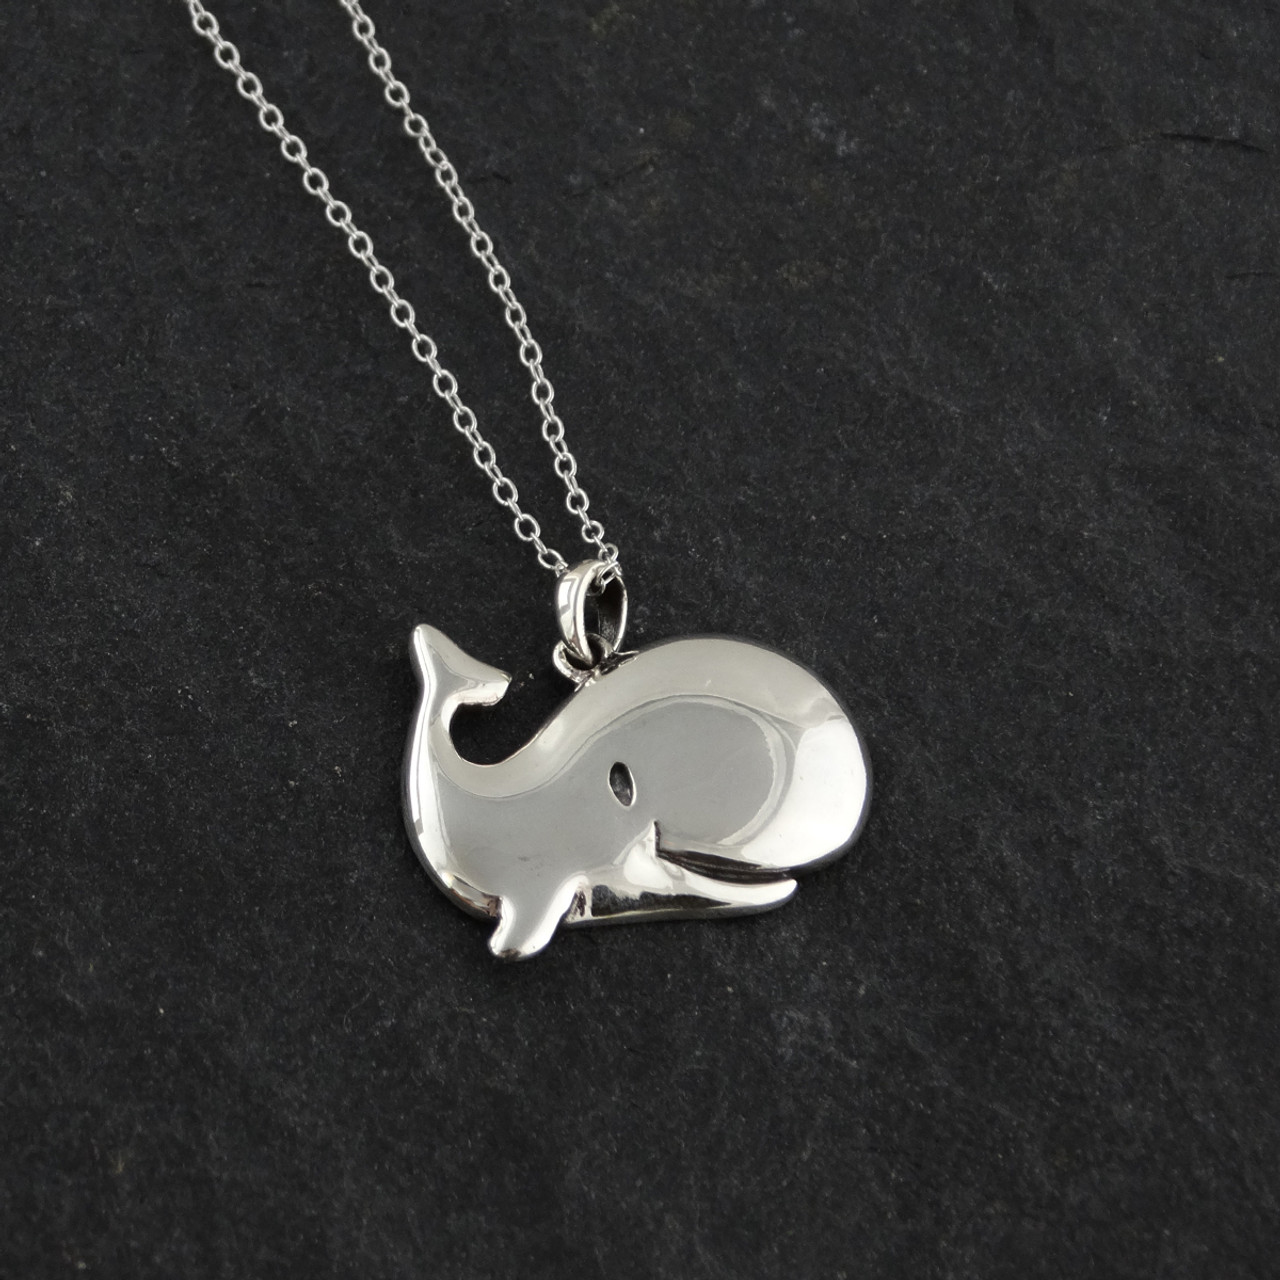 Whimsical Whale Pendant Necklace - Sterling Silver - FashionJunkie4Life